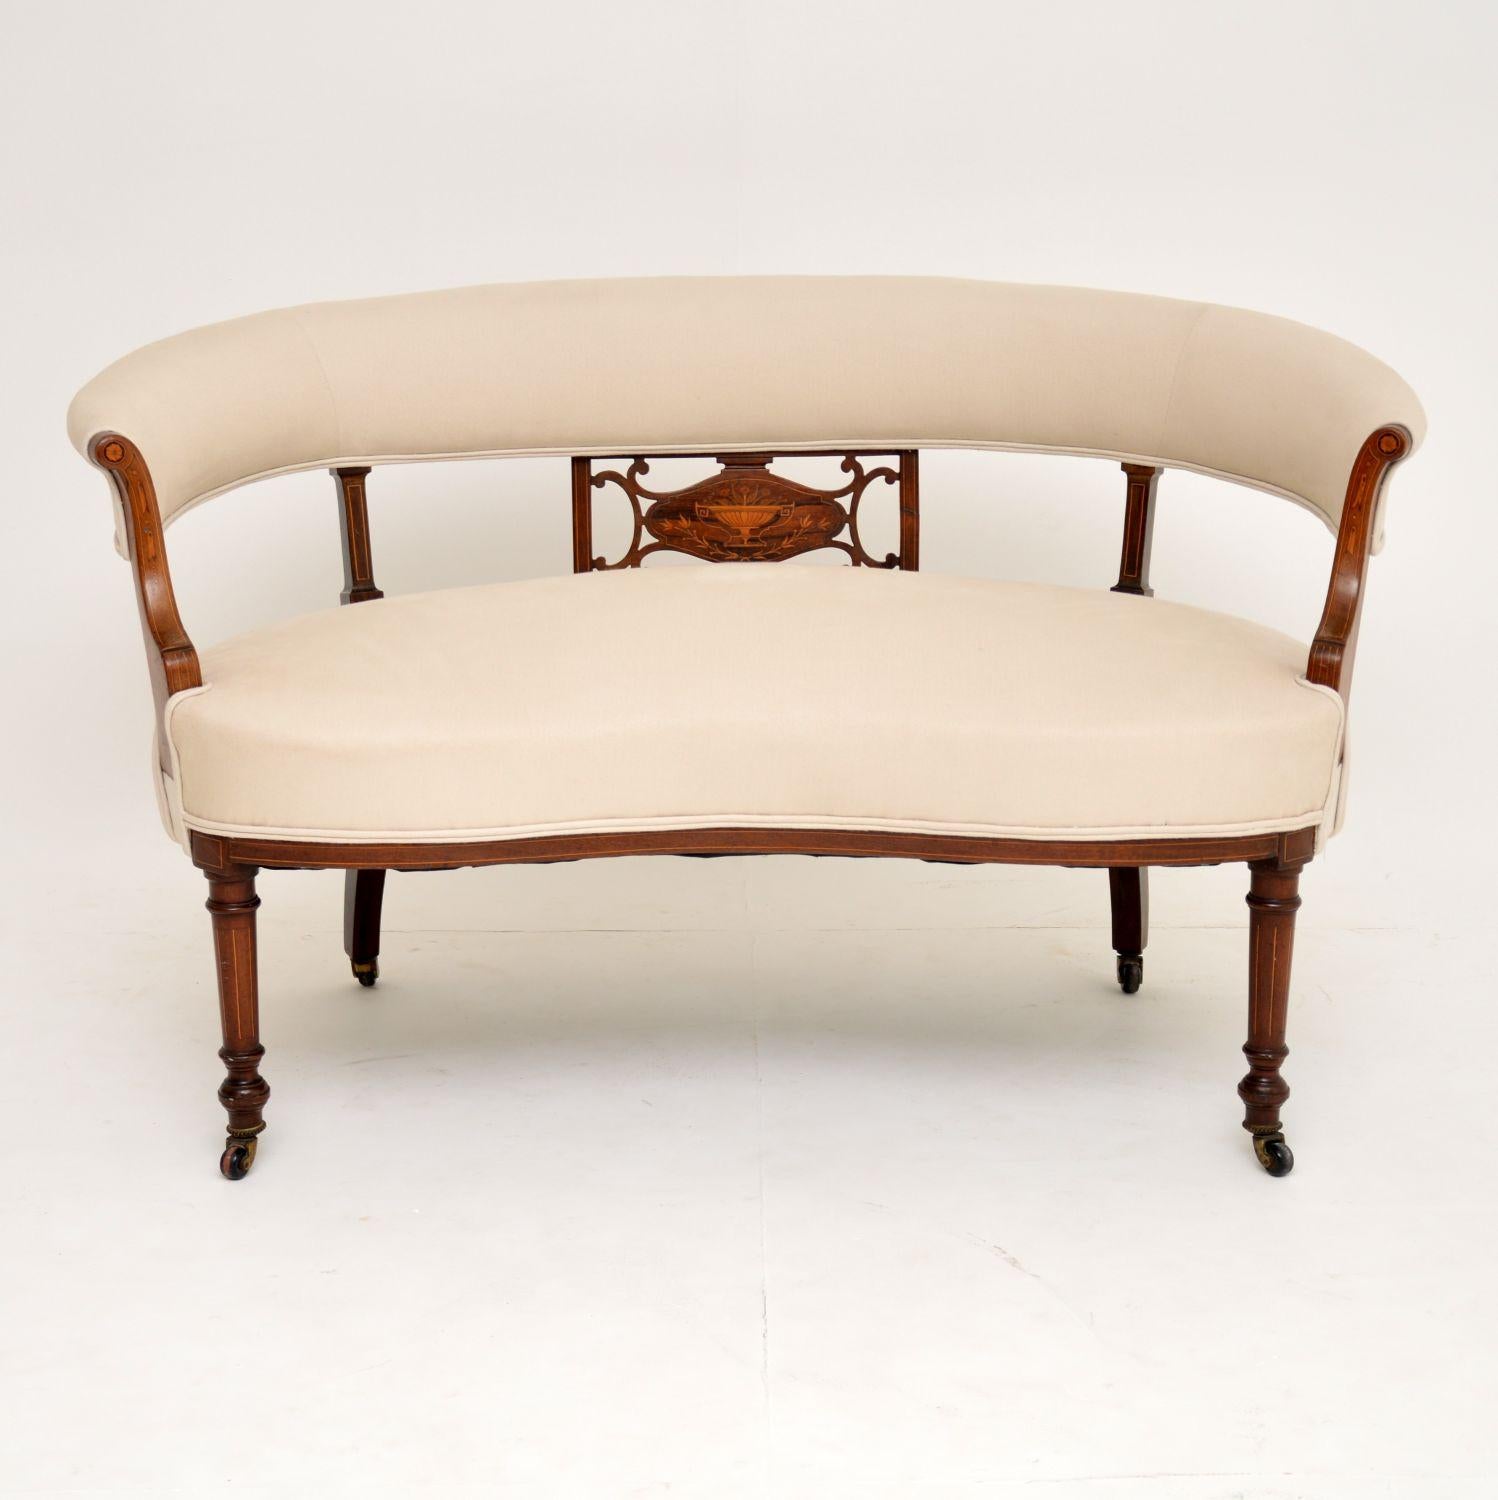 This antique Victorian upholstery settee has a curved back & a kidney shaped front edge. It dates from circa 1890 period & is in excellent condition, having just been re-polished & re-upholstered in our regular cream natural cotton linen